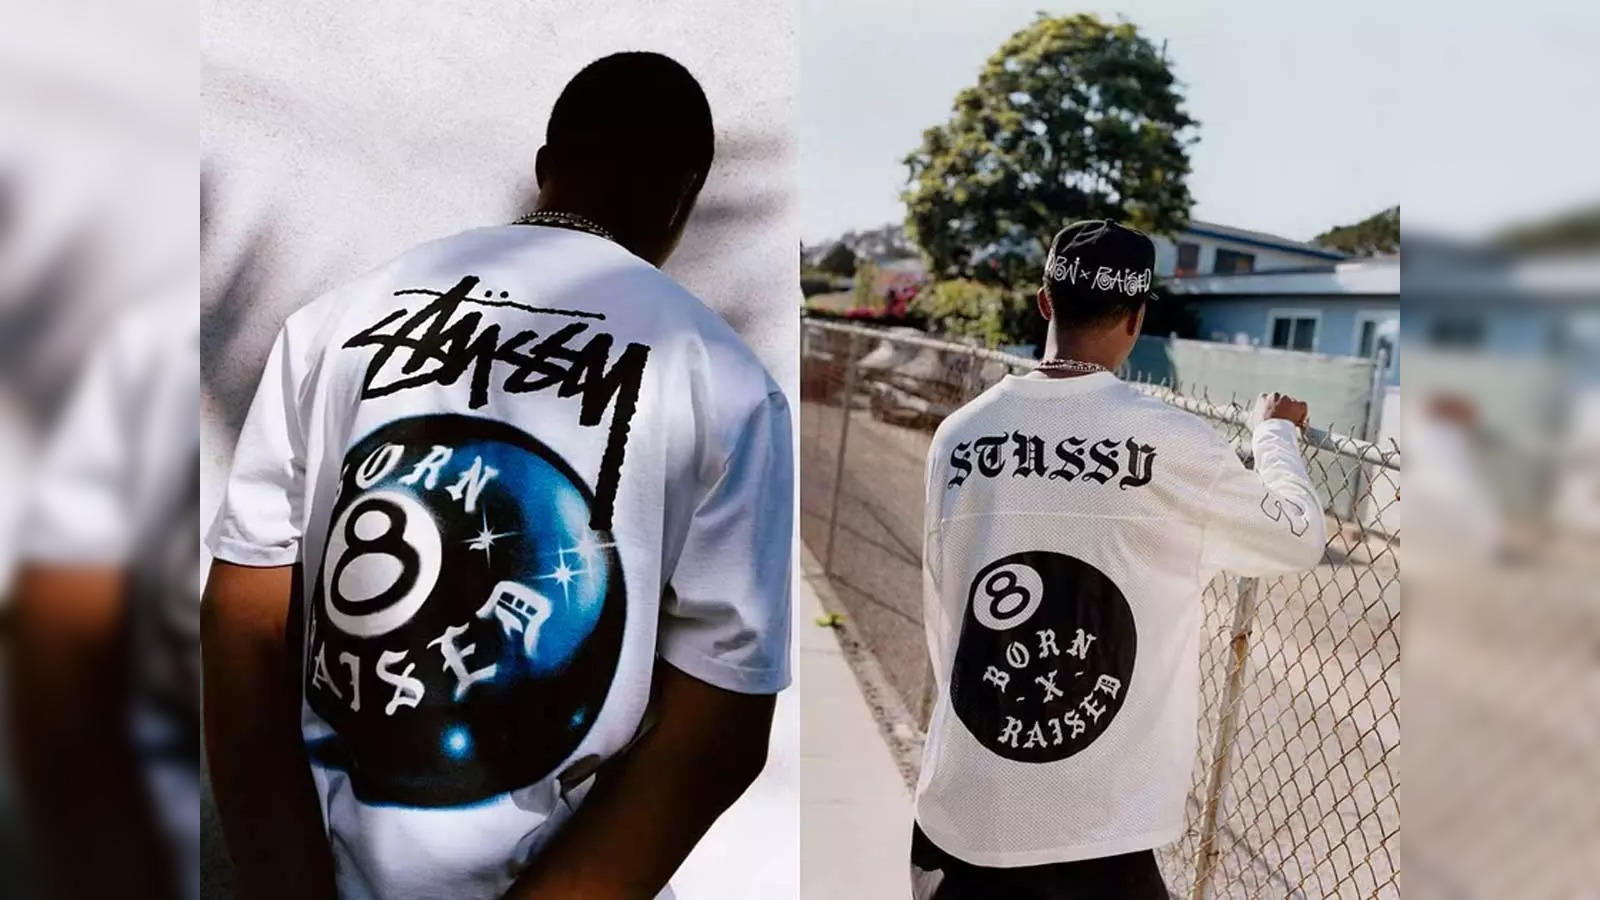 Born X Raised and Stüssy join forces for exclusive collection